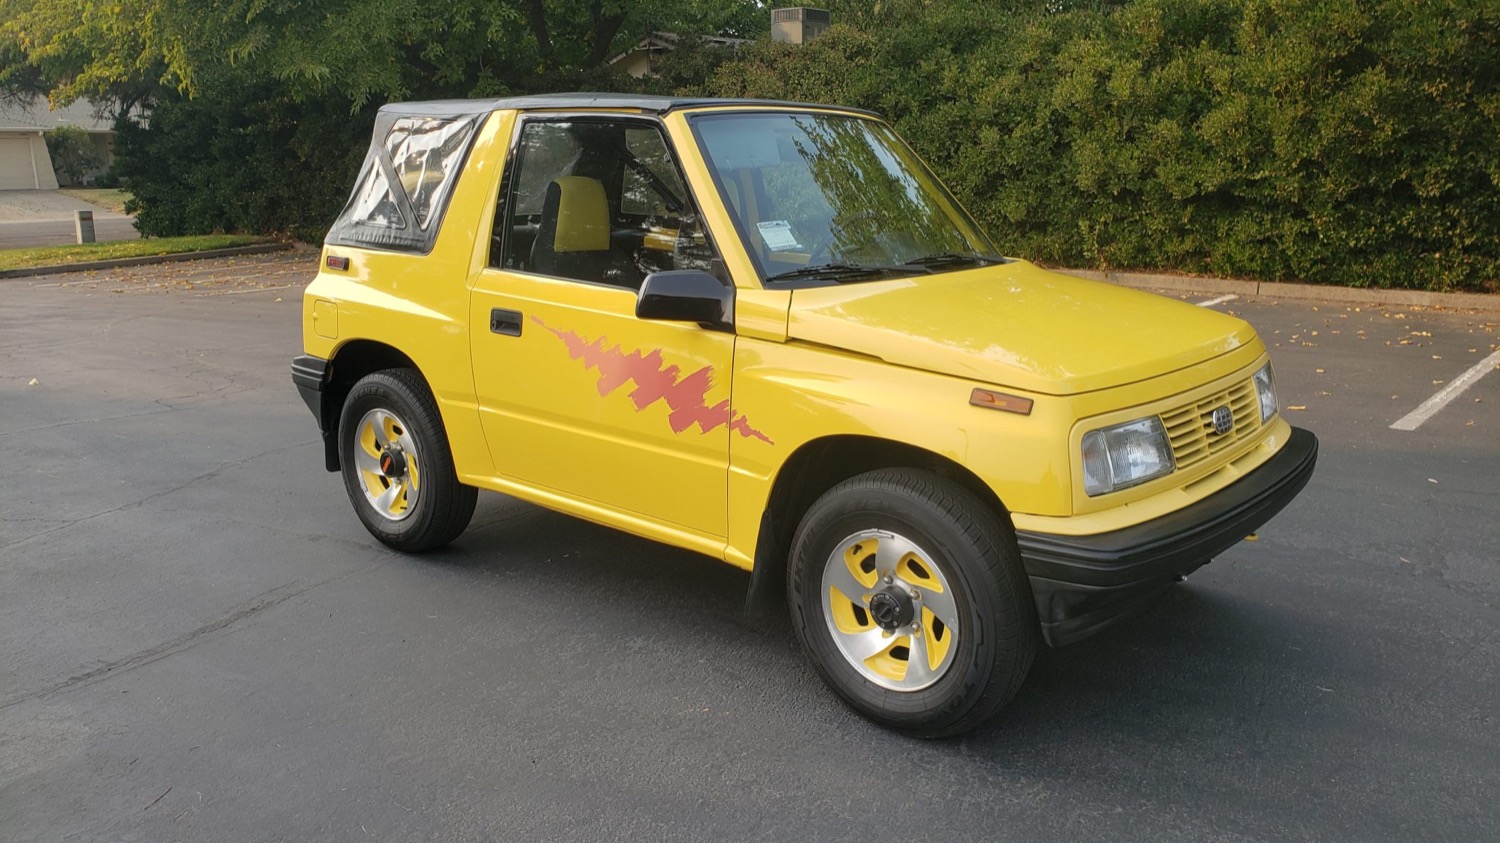 Very Yellow 1993 Geo Tracker Convertible For Sale